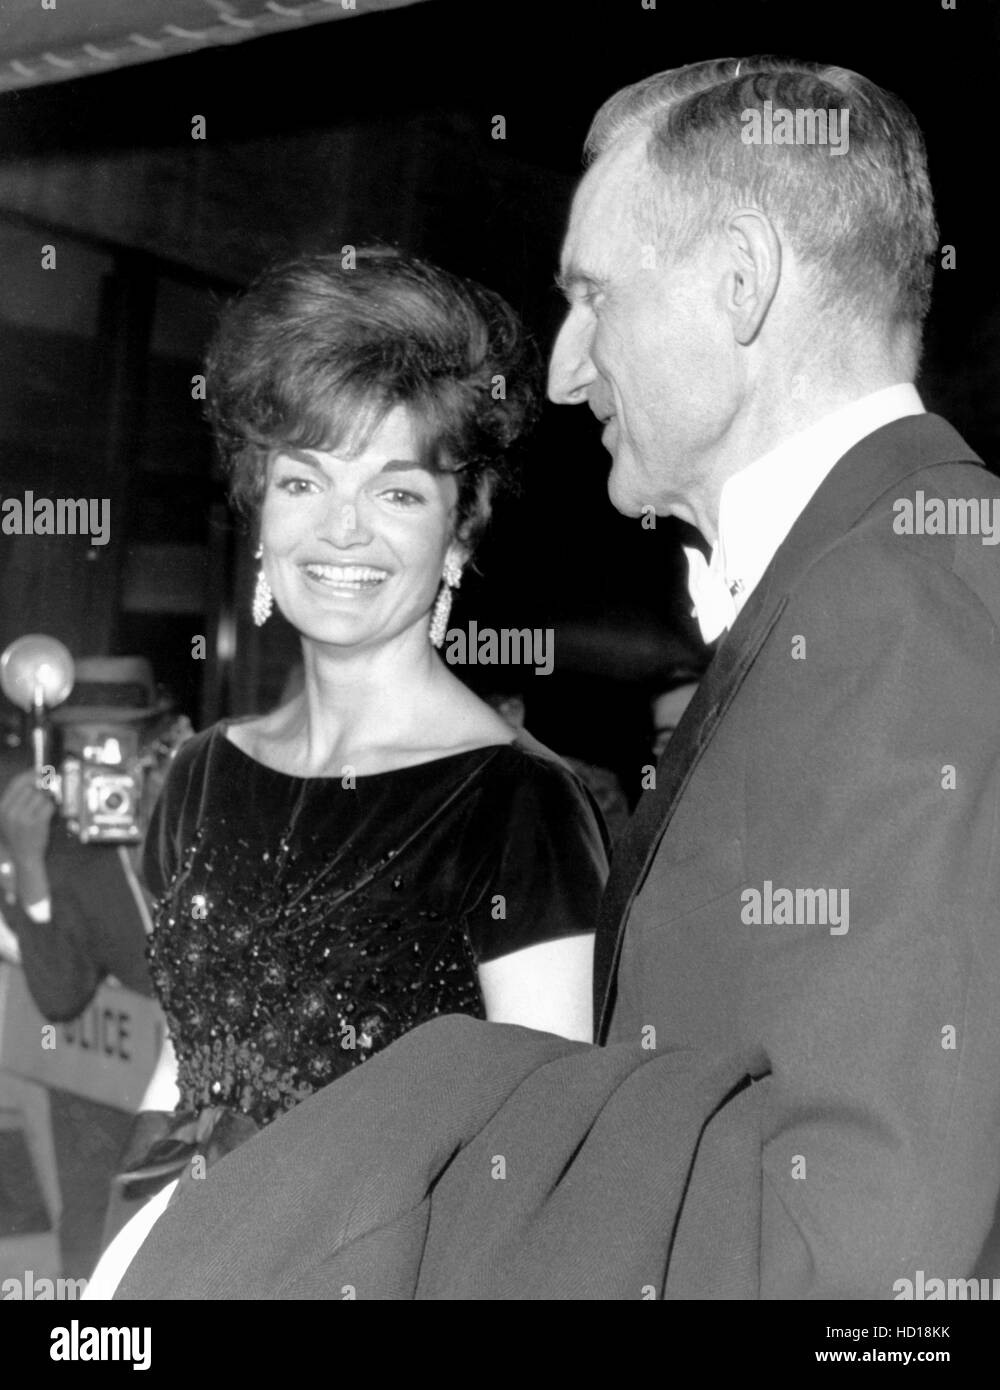 From left, Jacqueline Kennedy, John D. Rockefeller III, at the newly opened Lincoln Center Philharmonic Hall, September 23, 1962 Stock Photo